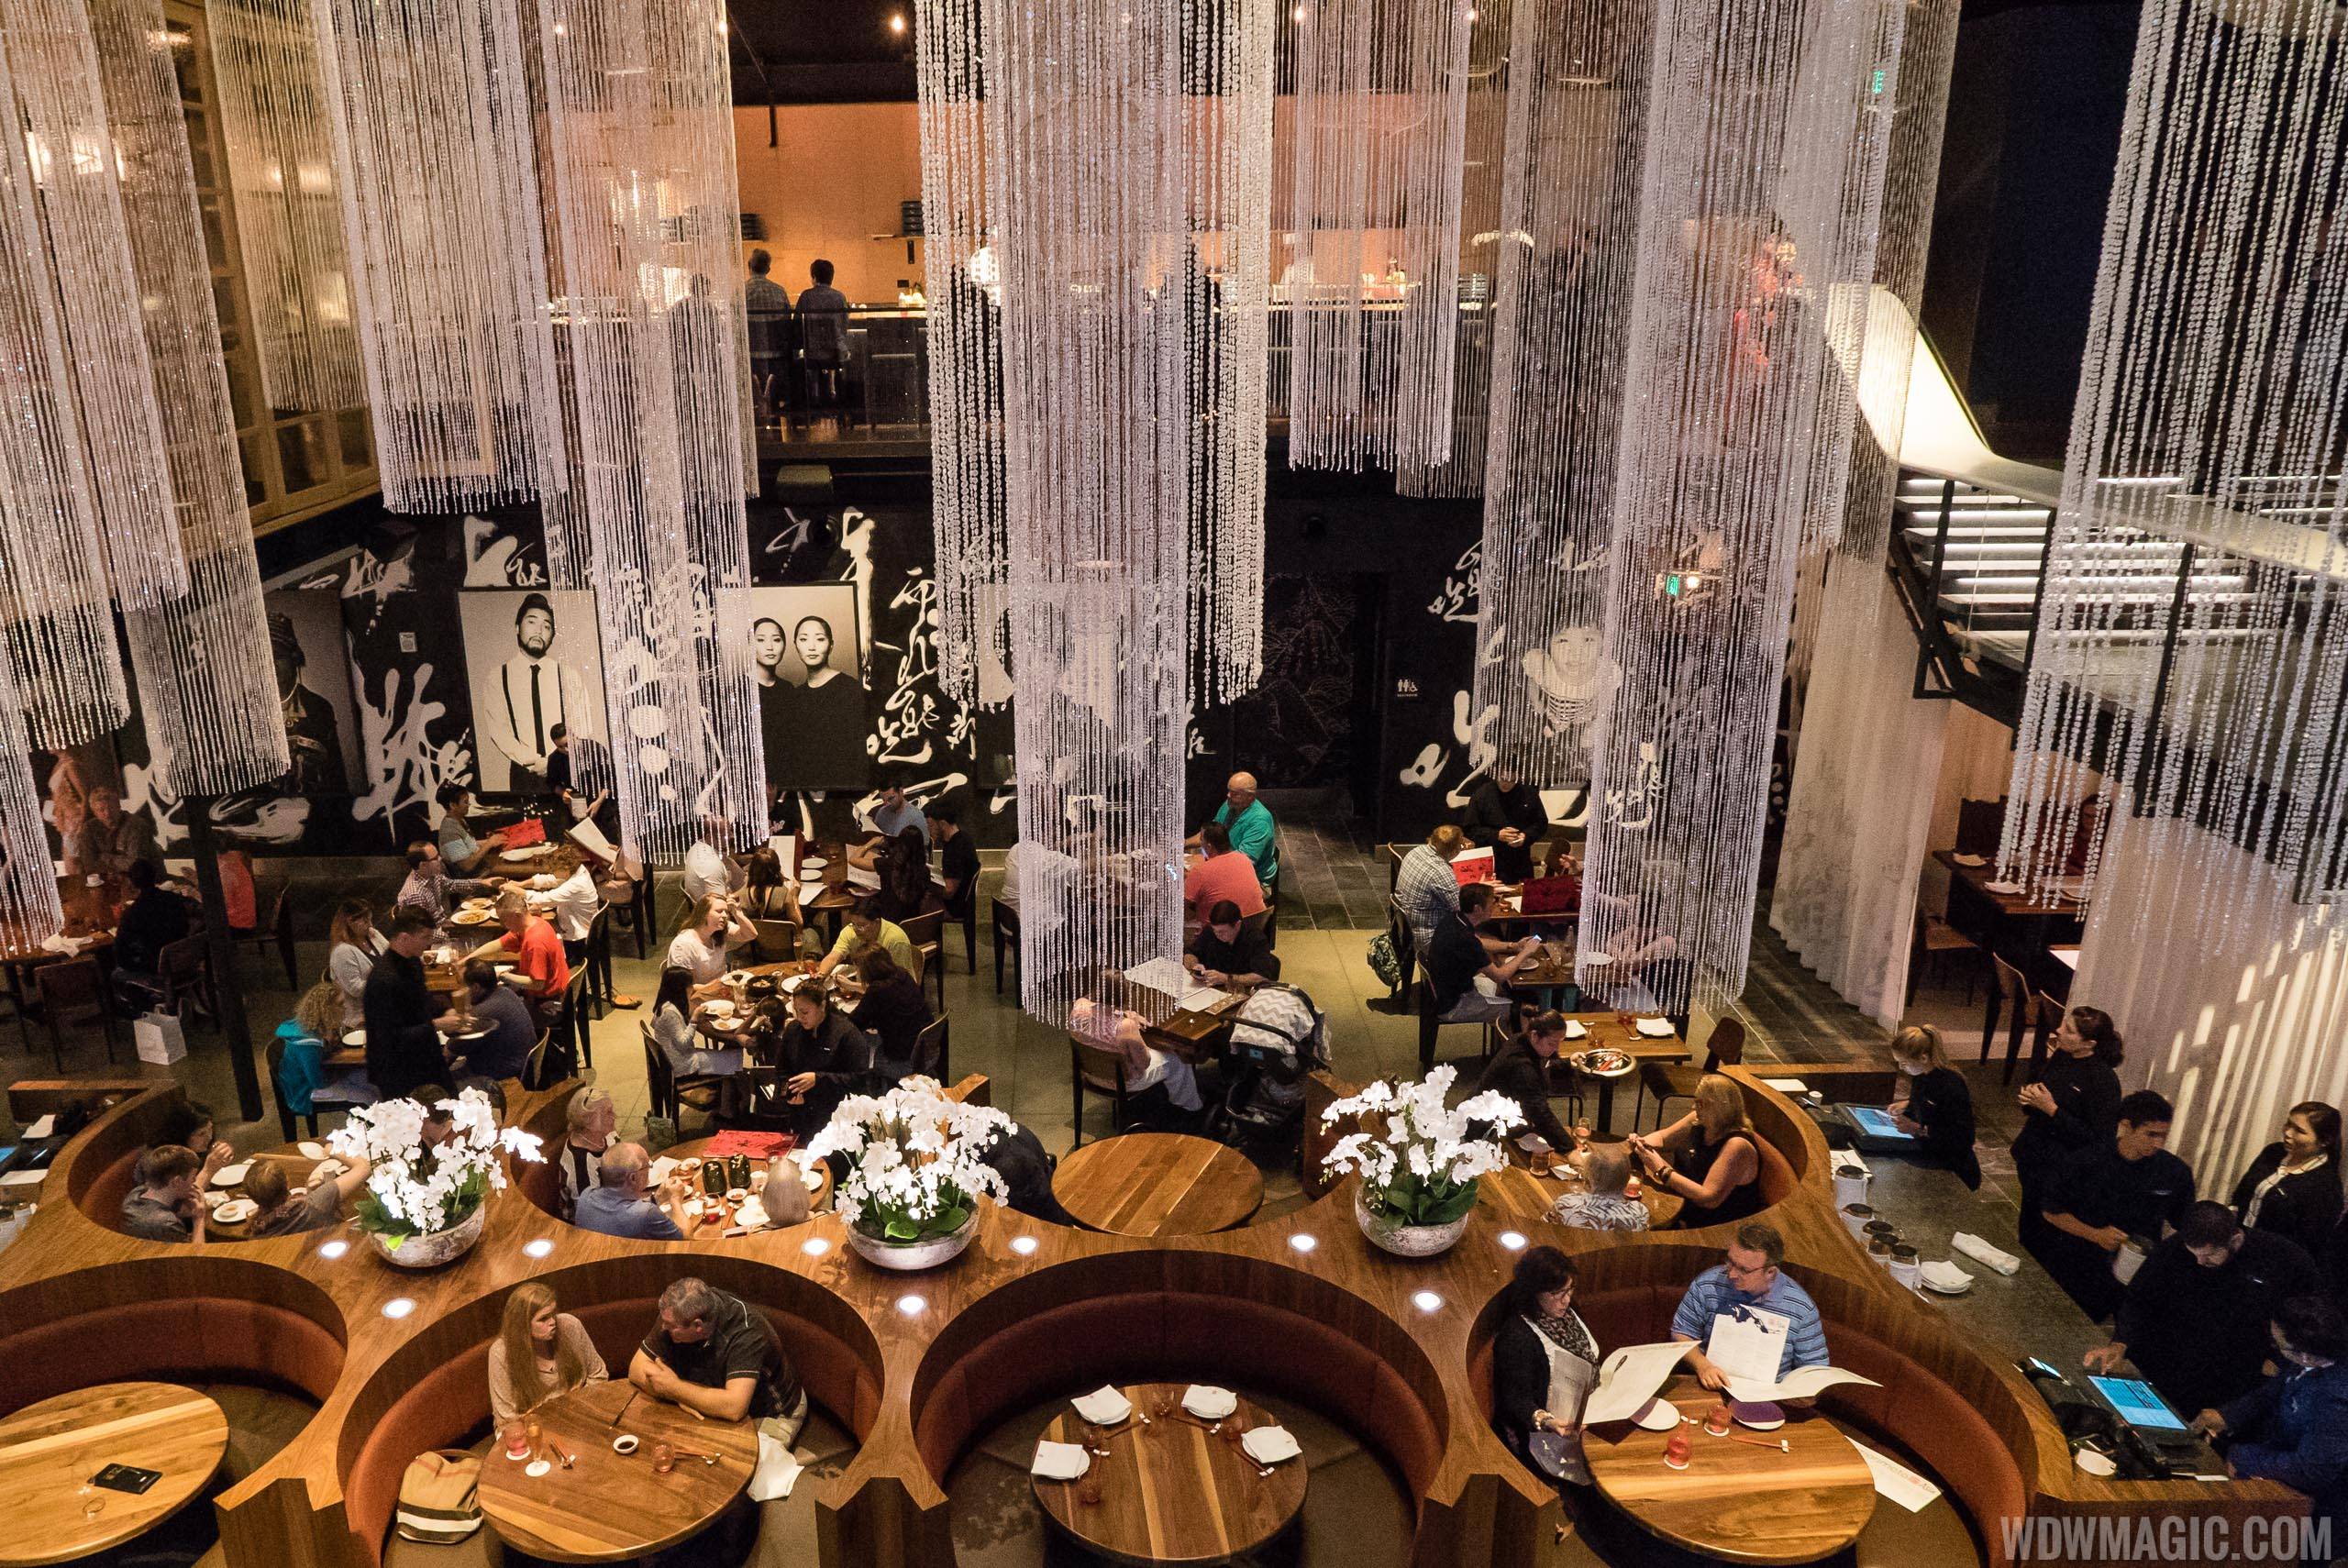 Bubbles & Brunch special dining event coming to Morimoto Asia at Disney Springs